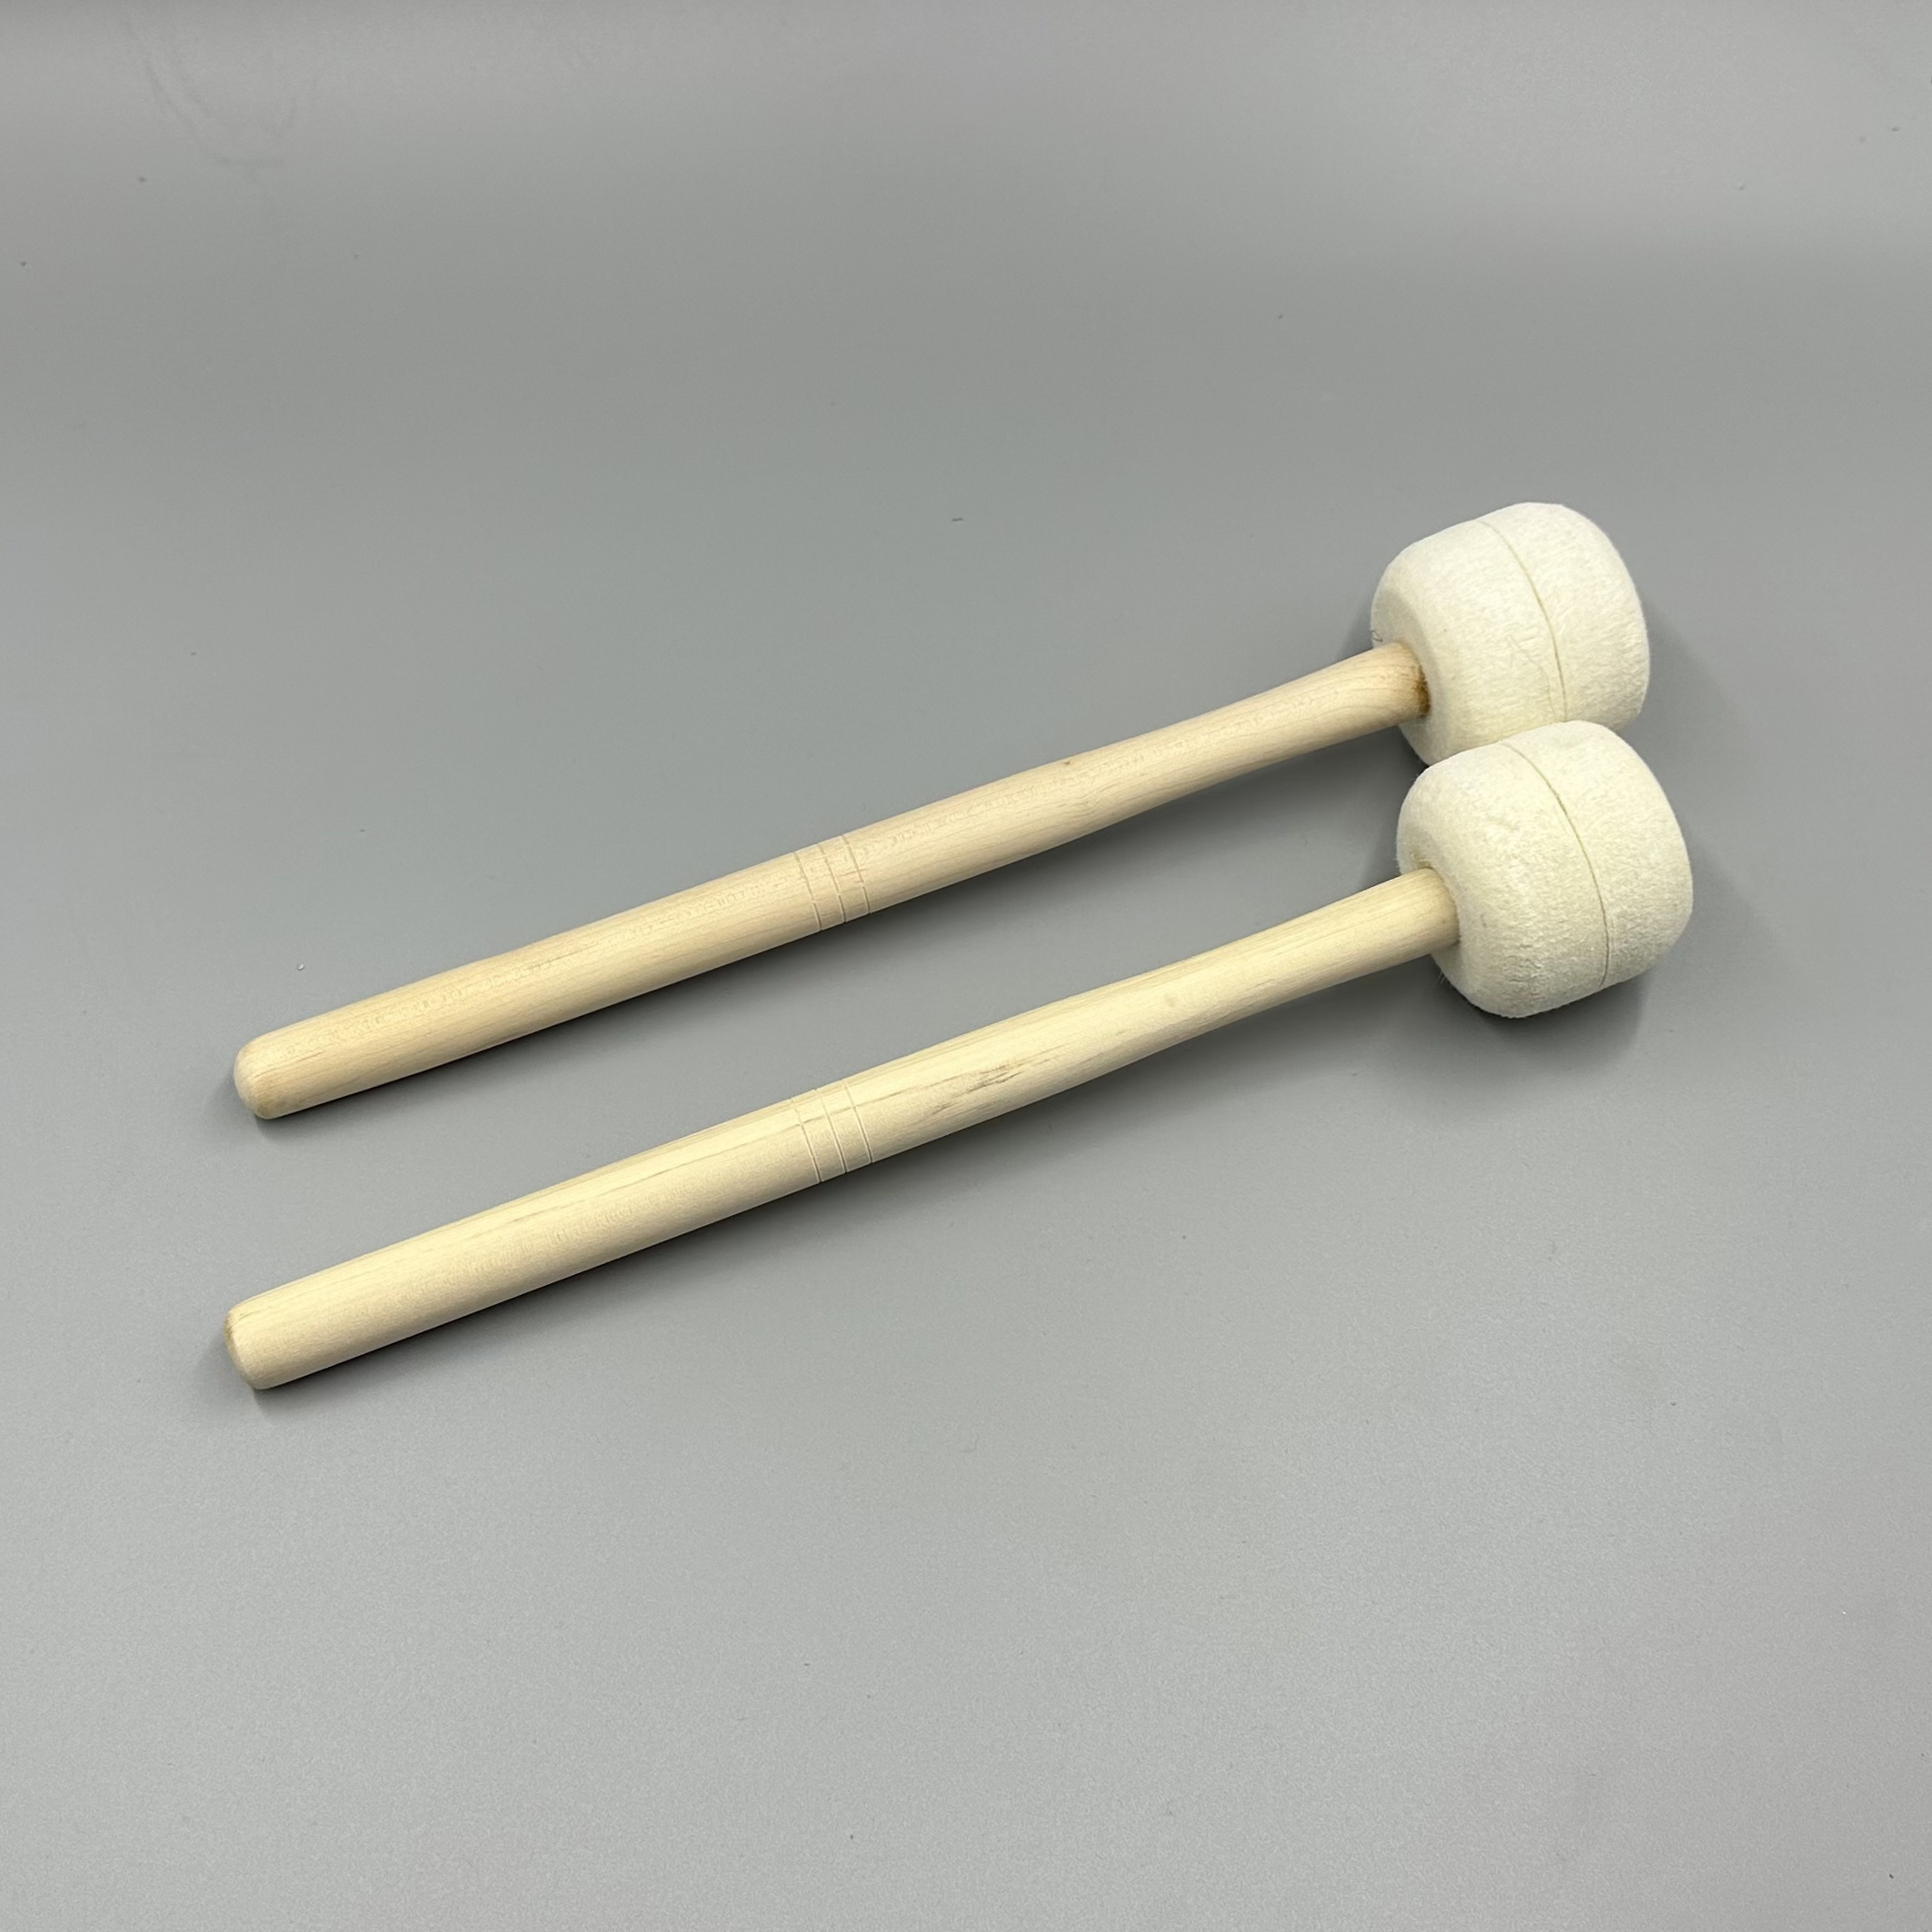 

2pcs Anti-slip Wool Felt Drum Mallet - 12.8 Inches Length - Perfect For Snare Drums And Percussion - Beige